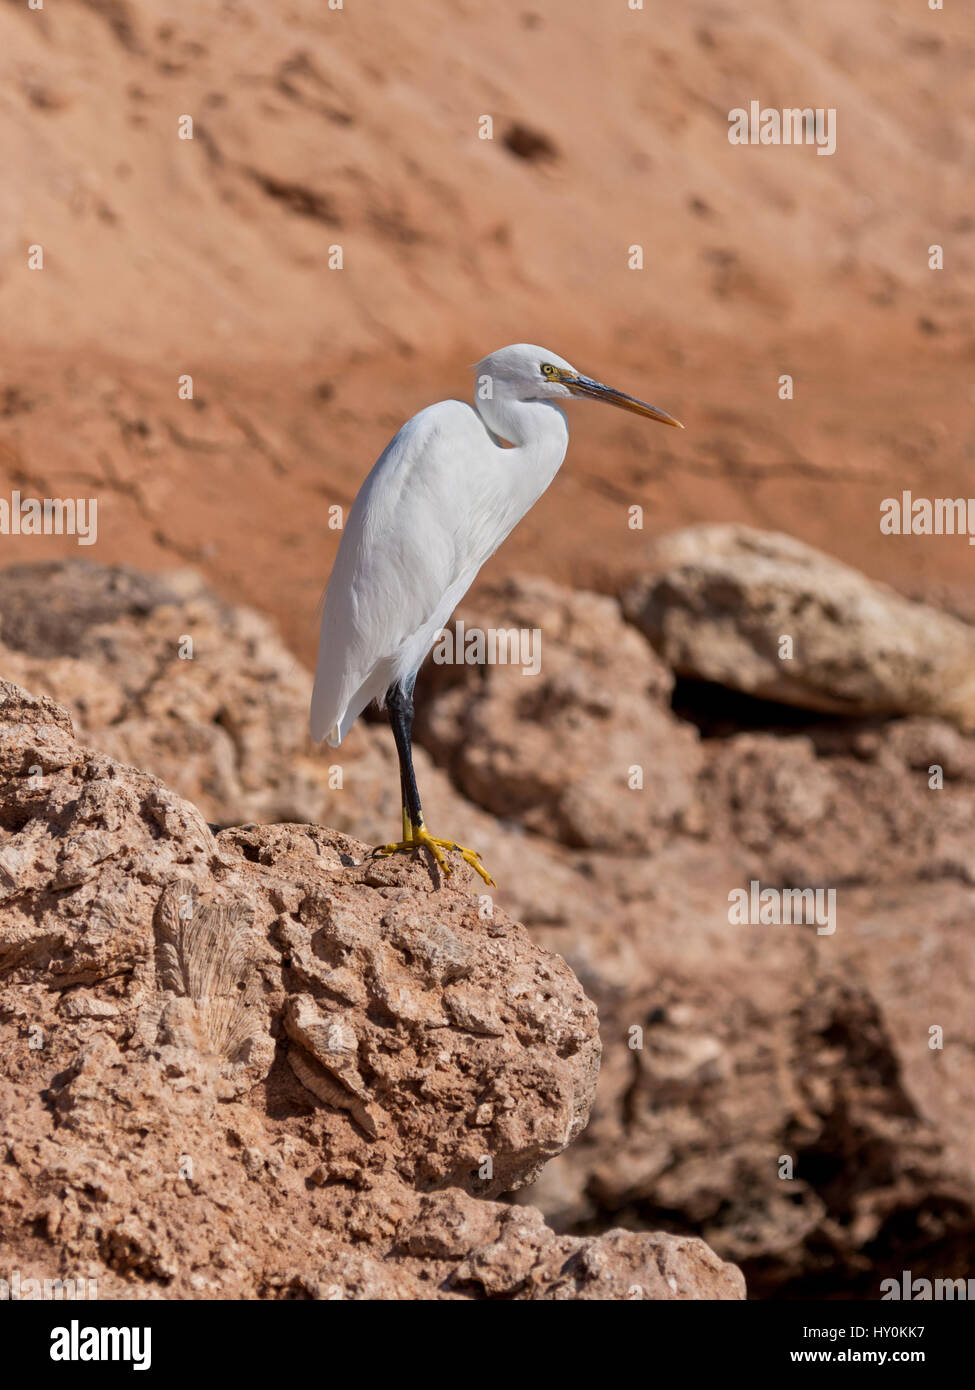 what is a white heron called